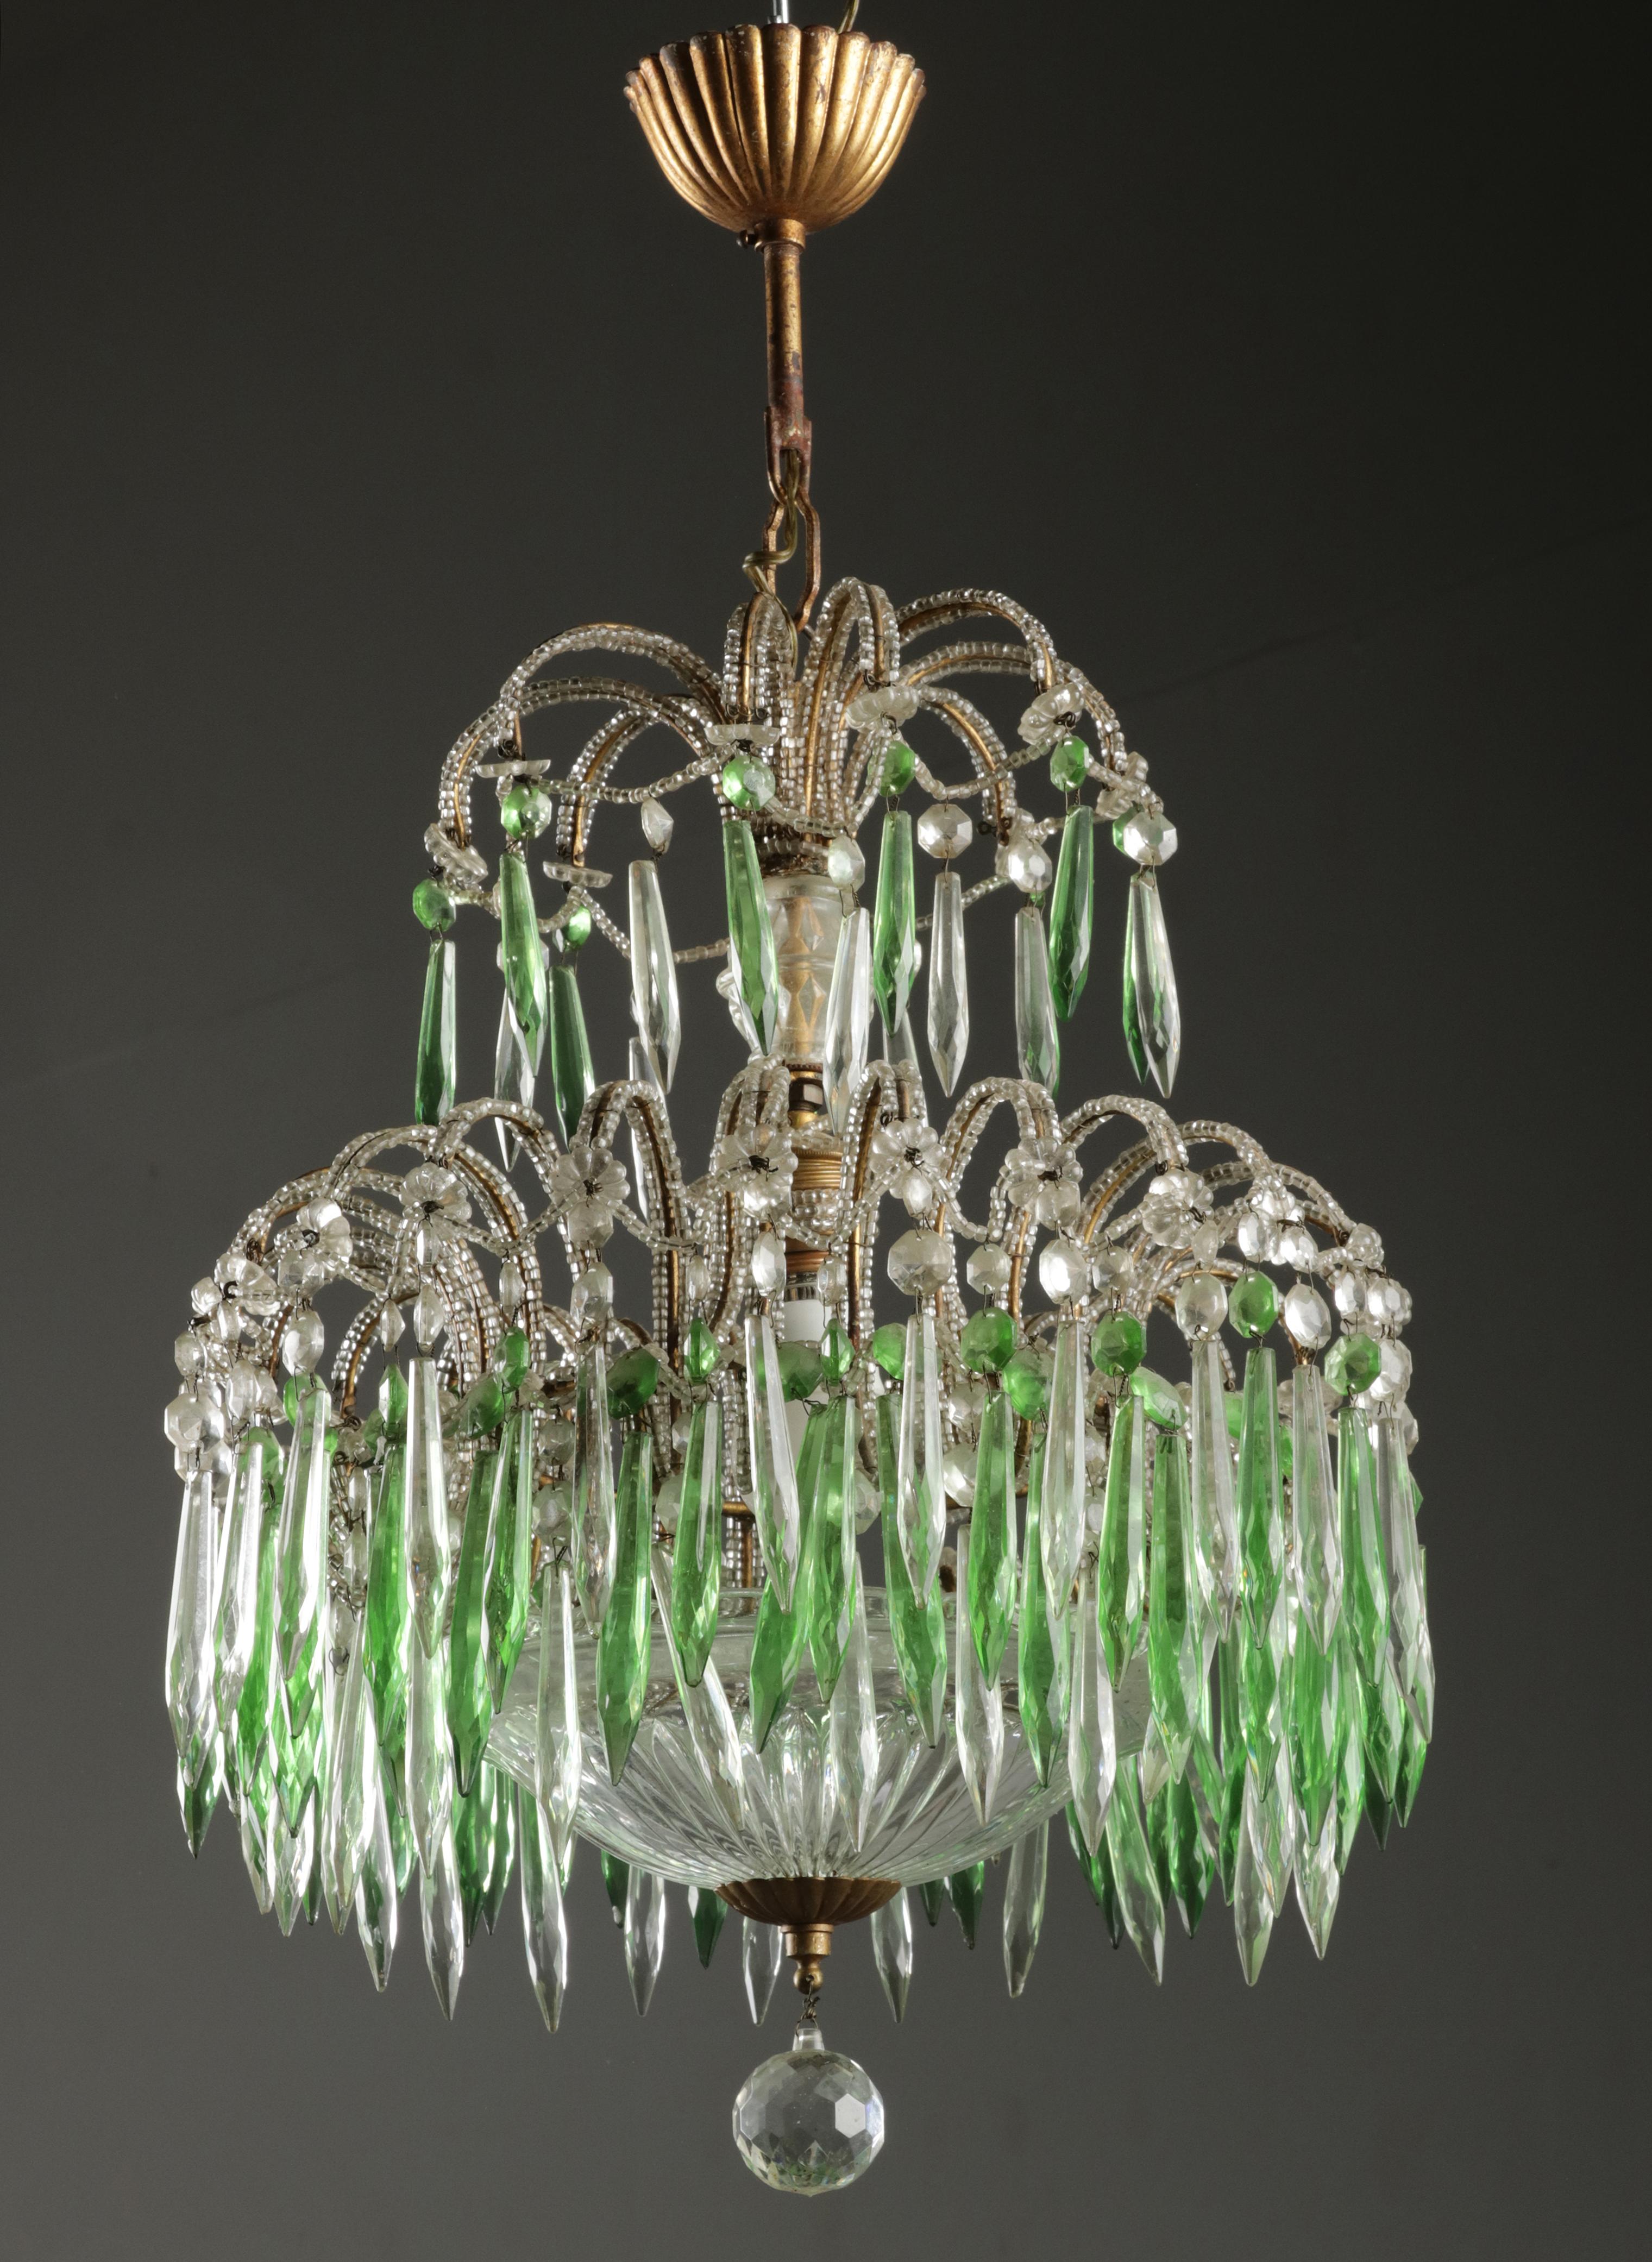 A colorful Italian palm-shaped chandelier with green and white glass drops. The armature is made of iron, embellished with string of glass beats. Made in Italy, circa 1950-1960. Inside one E27 lightbulb fitting. The lamp is tested and in working